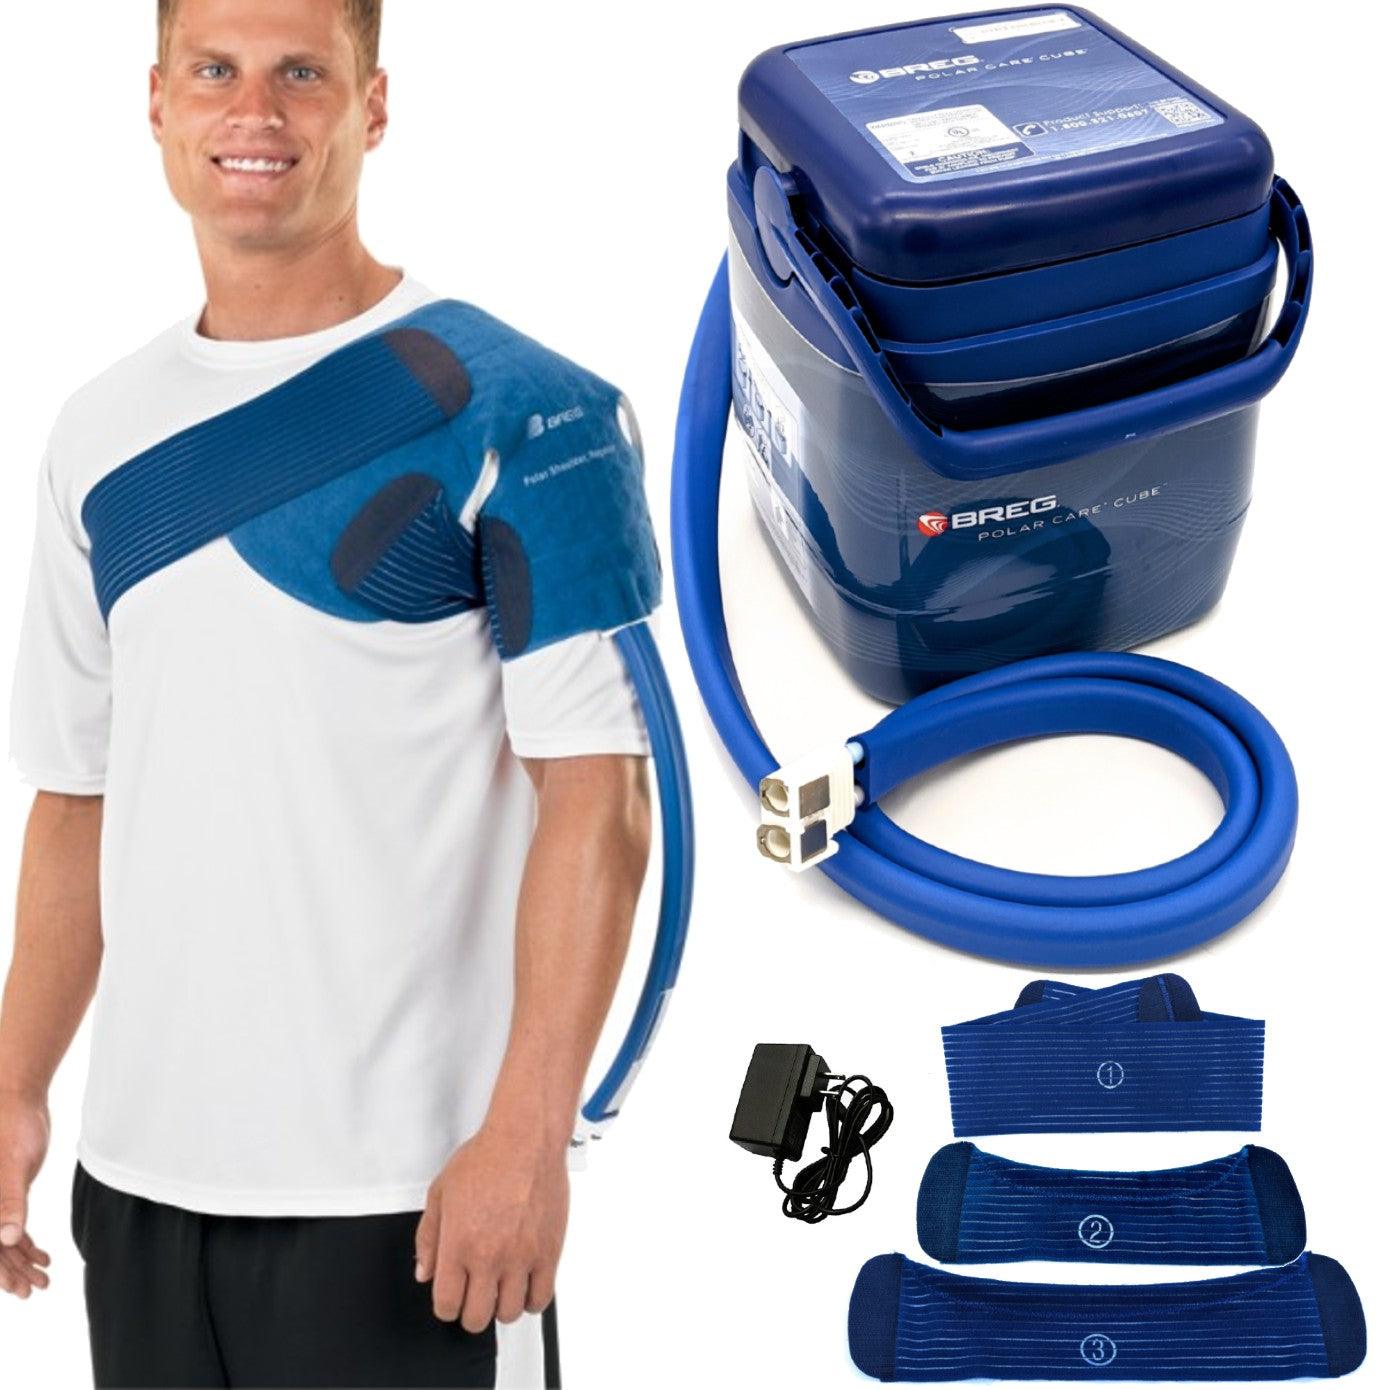 Breg® Polar Care Cube System w/ Wrap-On Pads - 04905-000 Breg® Polar Care Cube System w/ Wrap-On Pads - undefined by Supply Physical Therapy Breg, Cold Therapy Units, Combos, Cube